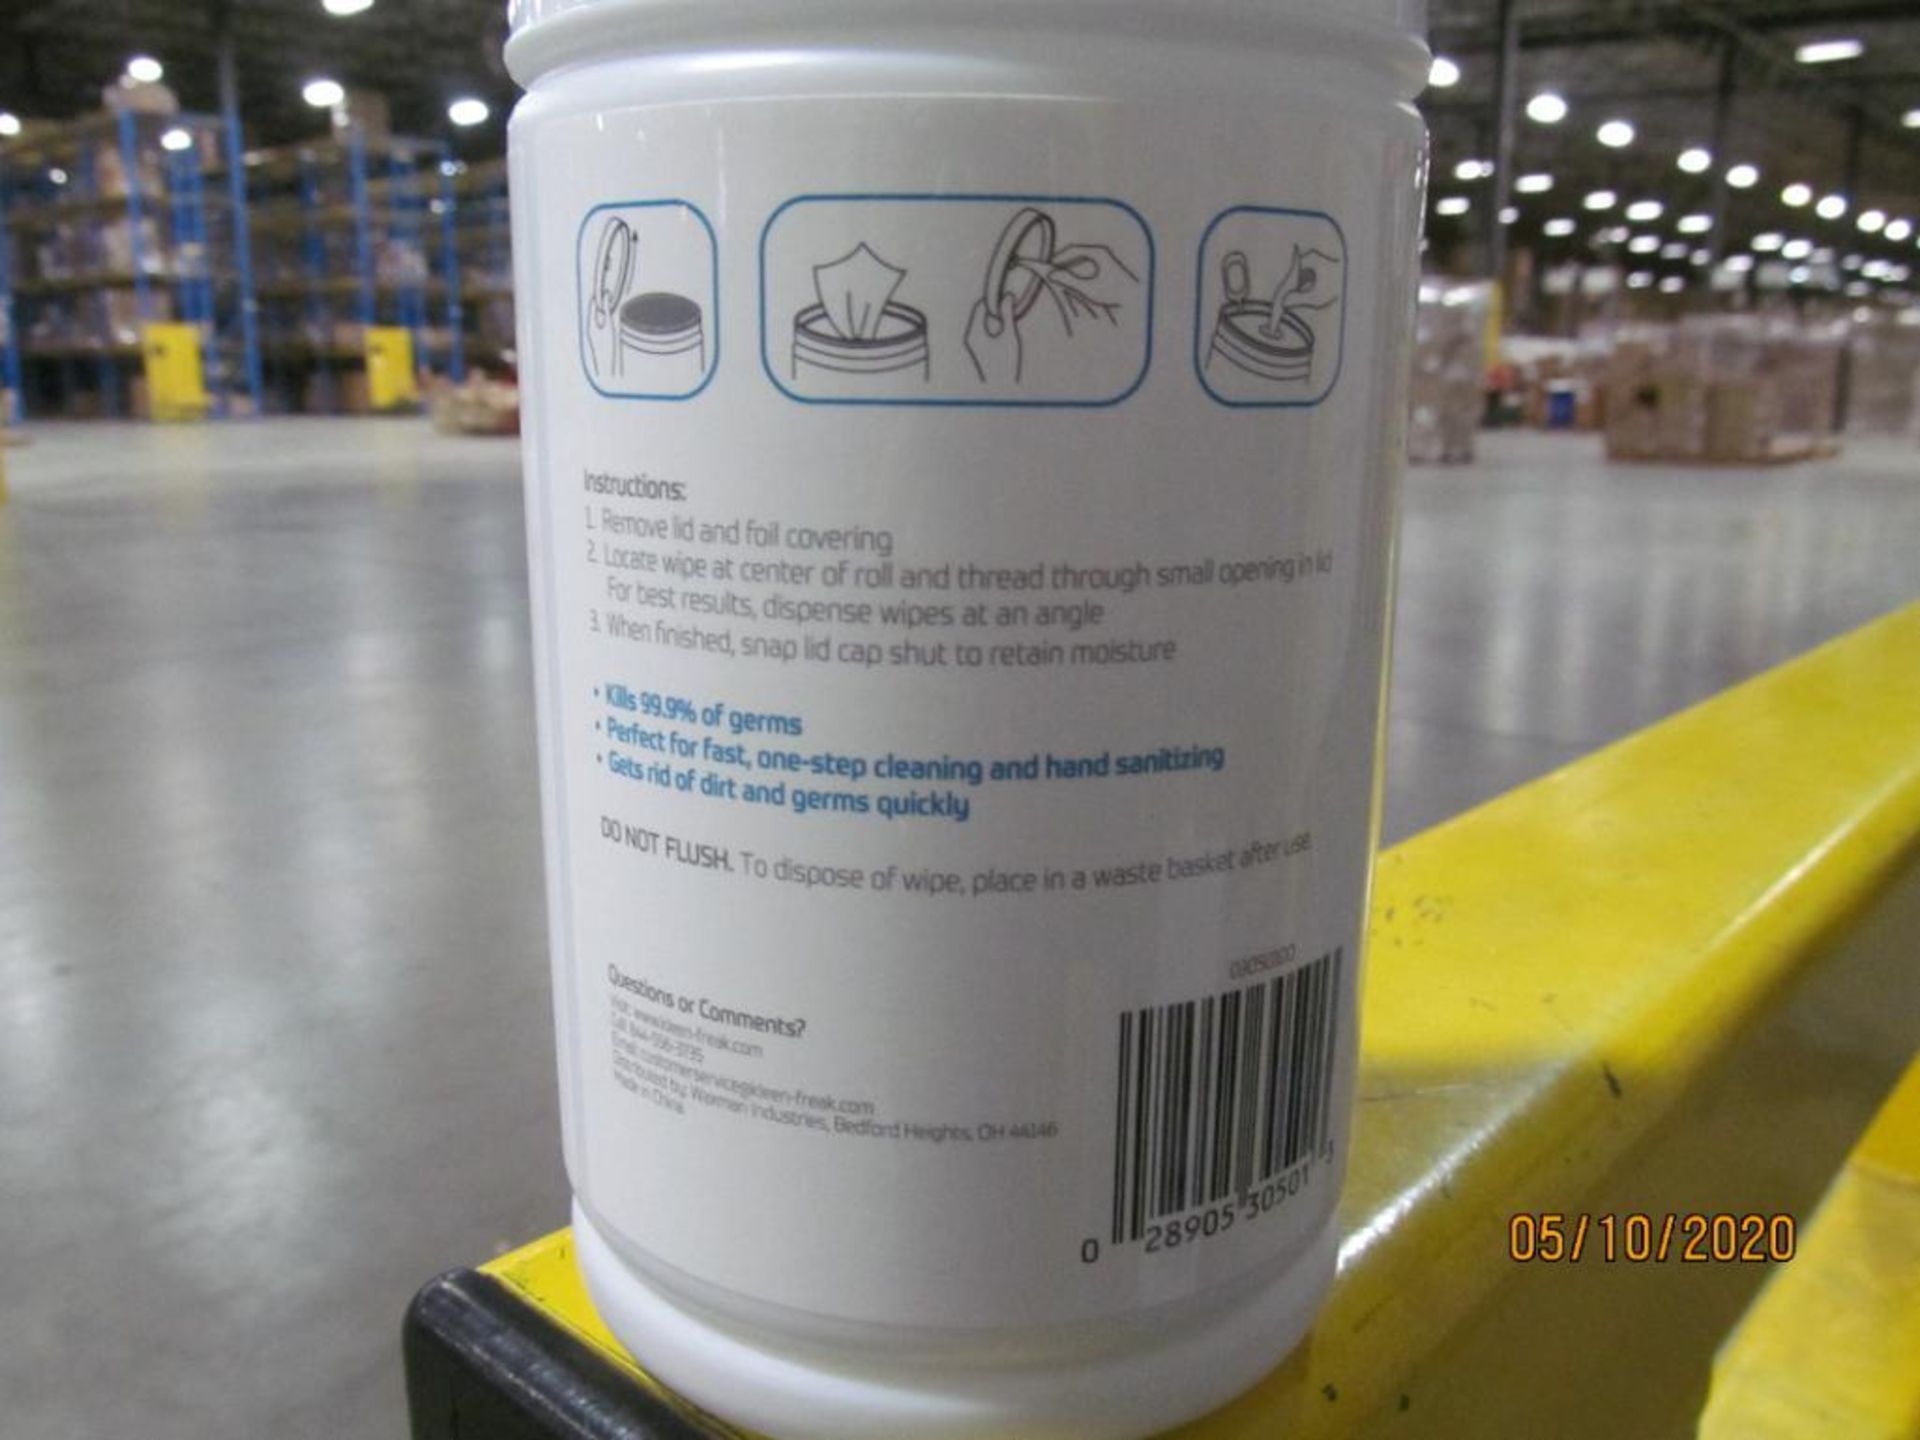 Lot of Waxman Kleen Freak Sanitizing Wipes consisting of 269,568 packages on 416 pallets. Each packa - Image 2 of 11